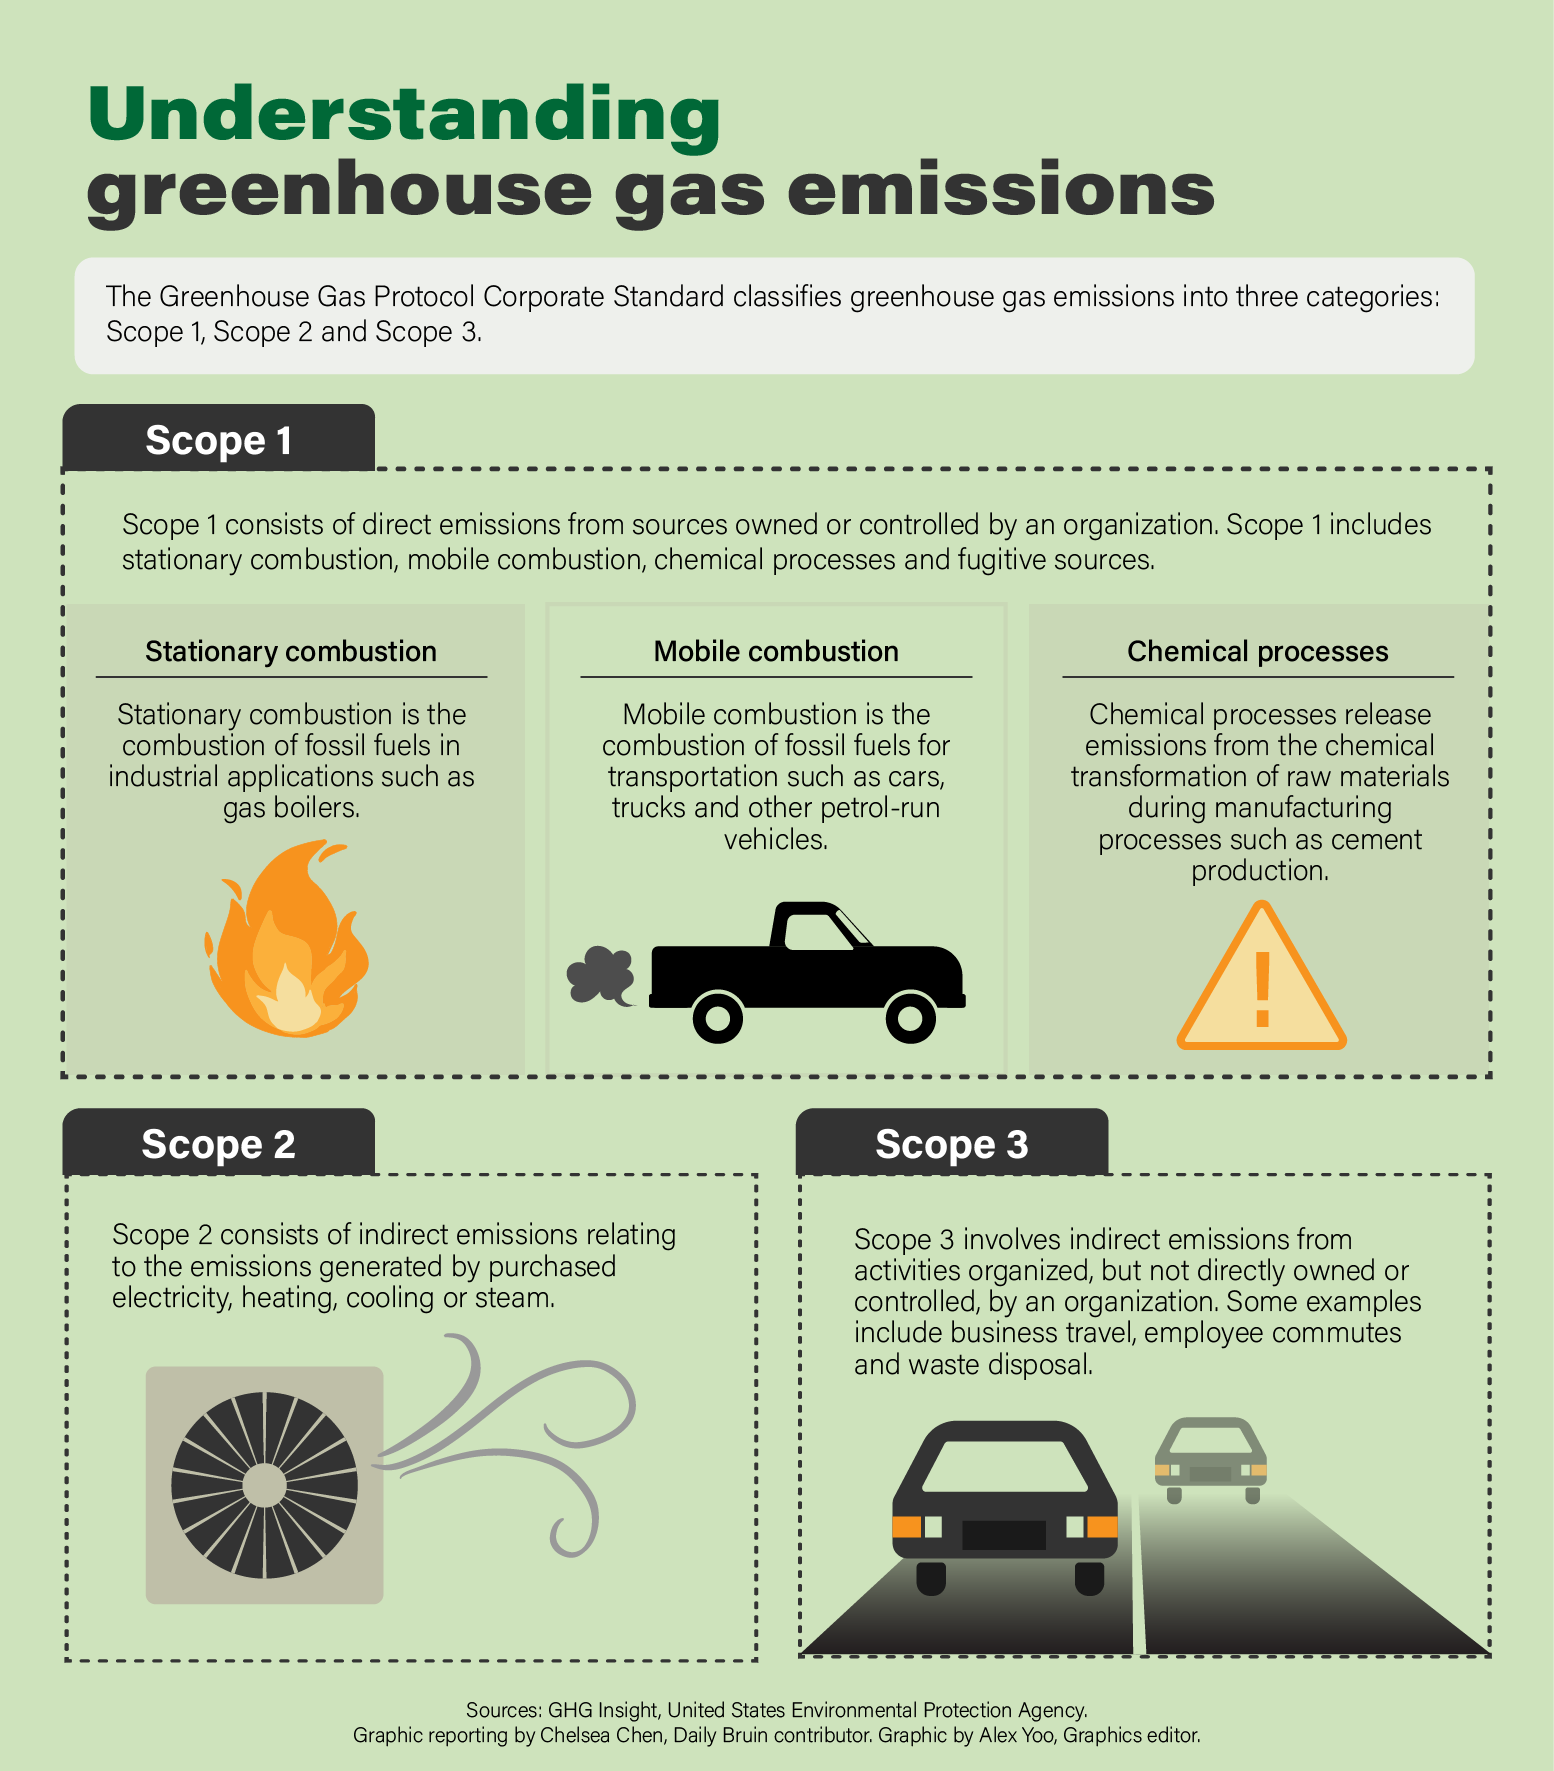 Graphic: Understanding Greenhouse Gas Emissions. The Greenhouse Gas Protocol Corporate Standard (or GHG protocol) classifies greenhouse gas emissions into three categories: Scope 1, Scope 2, and Scope 3. 
Scope 1 consists of emissions from direct or controlled sources from an organization, such as stationary combustion, mobile combustion, chemical processes and fugitive sources. Stationary combustion is the combustion of fossil fuels for industrial applications such as gas boilers. Mobile combustion is the combustion of fossil fuels for transportation such as cars, trucks and other petrol-run vehicles. Chemical processes release emissions from the chemical transformation of raw materials during manufacturing such as cement production. Fugitive emissions are the leaks and other unintentional gas emissions such as gas leaks from refrigeration units. 
Scope 2 consists of indirect emissions from purchased entities by an organization. These are indirect emissions released by purchased electricity, heating, cooling or steam. Scope 3 involves indirect emissions from activities organized, but neither directly owned or controlled, by an organization. Some examples include business travel, employee commute, and waste disposal.